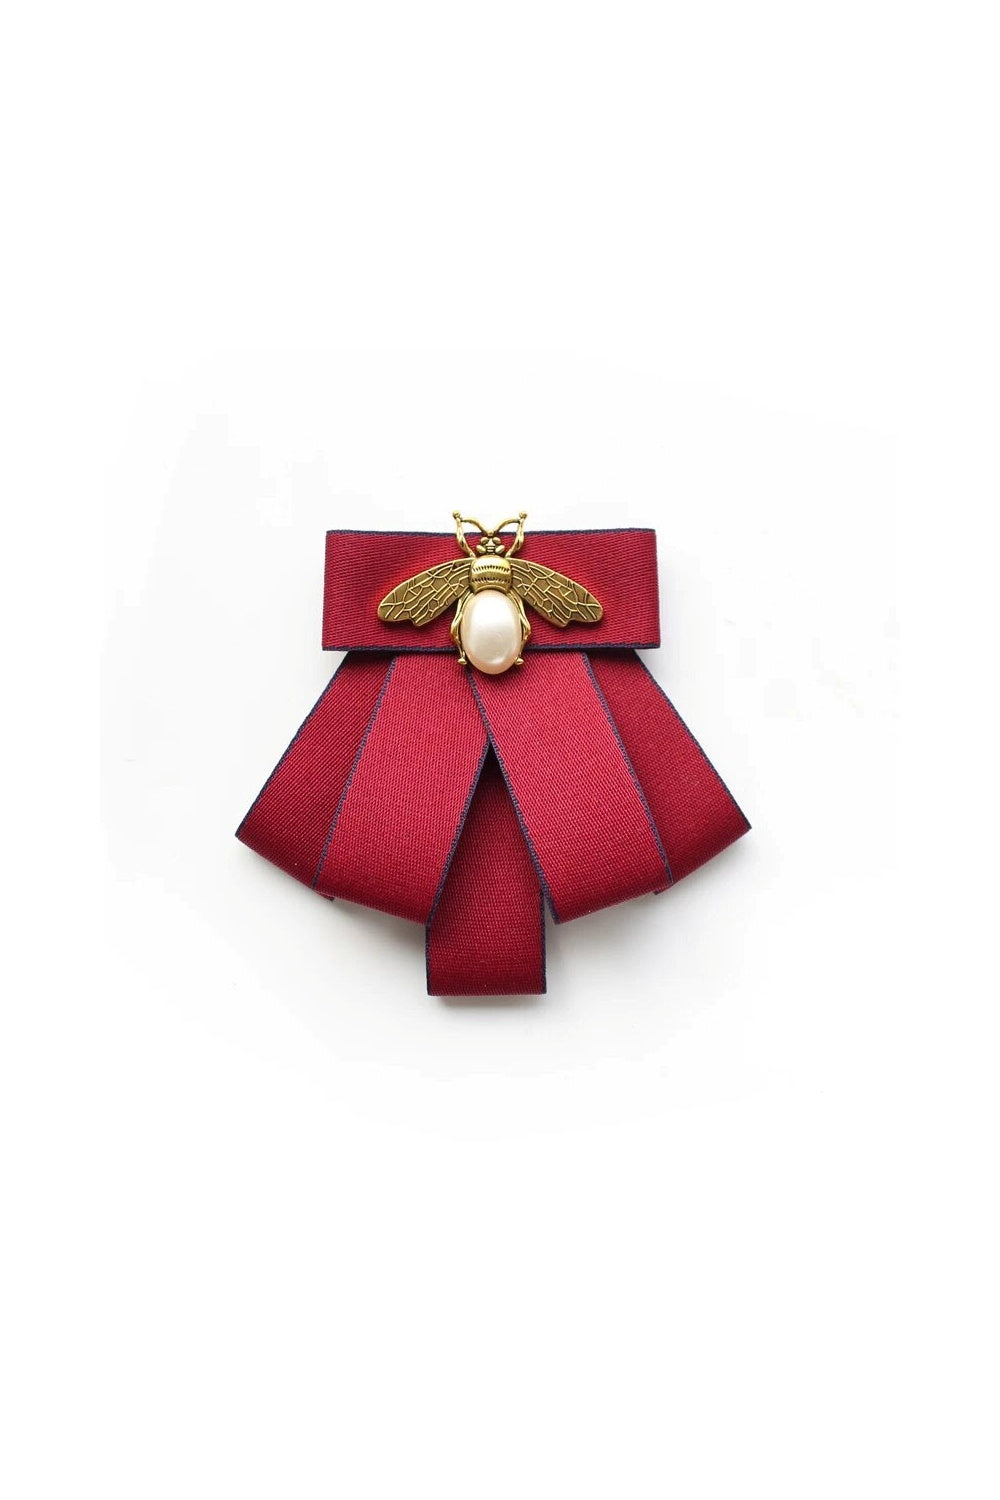 THE BEES KNEES BROOCH PINOT